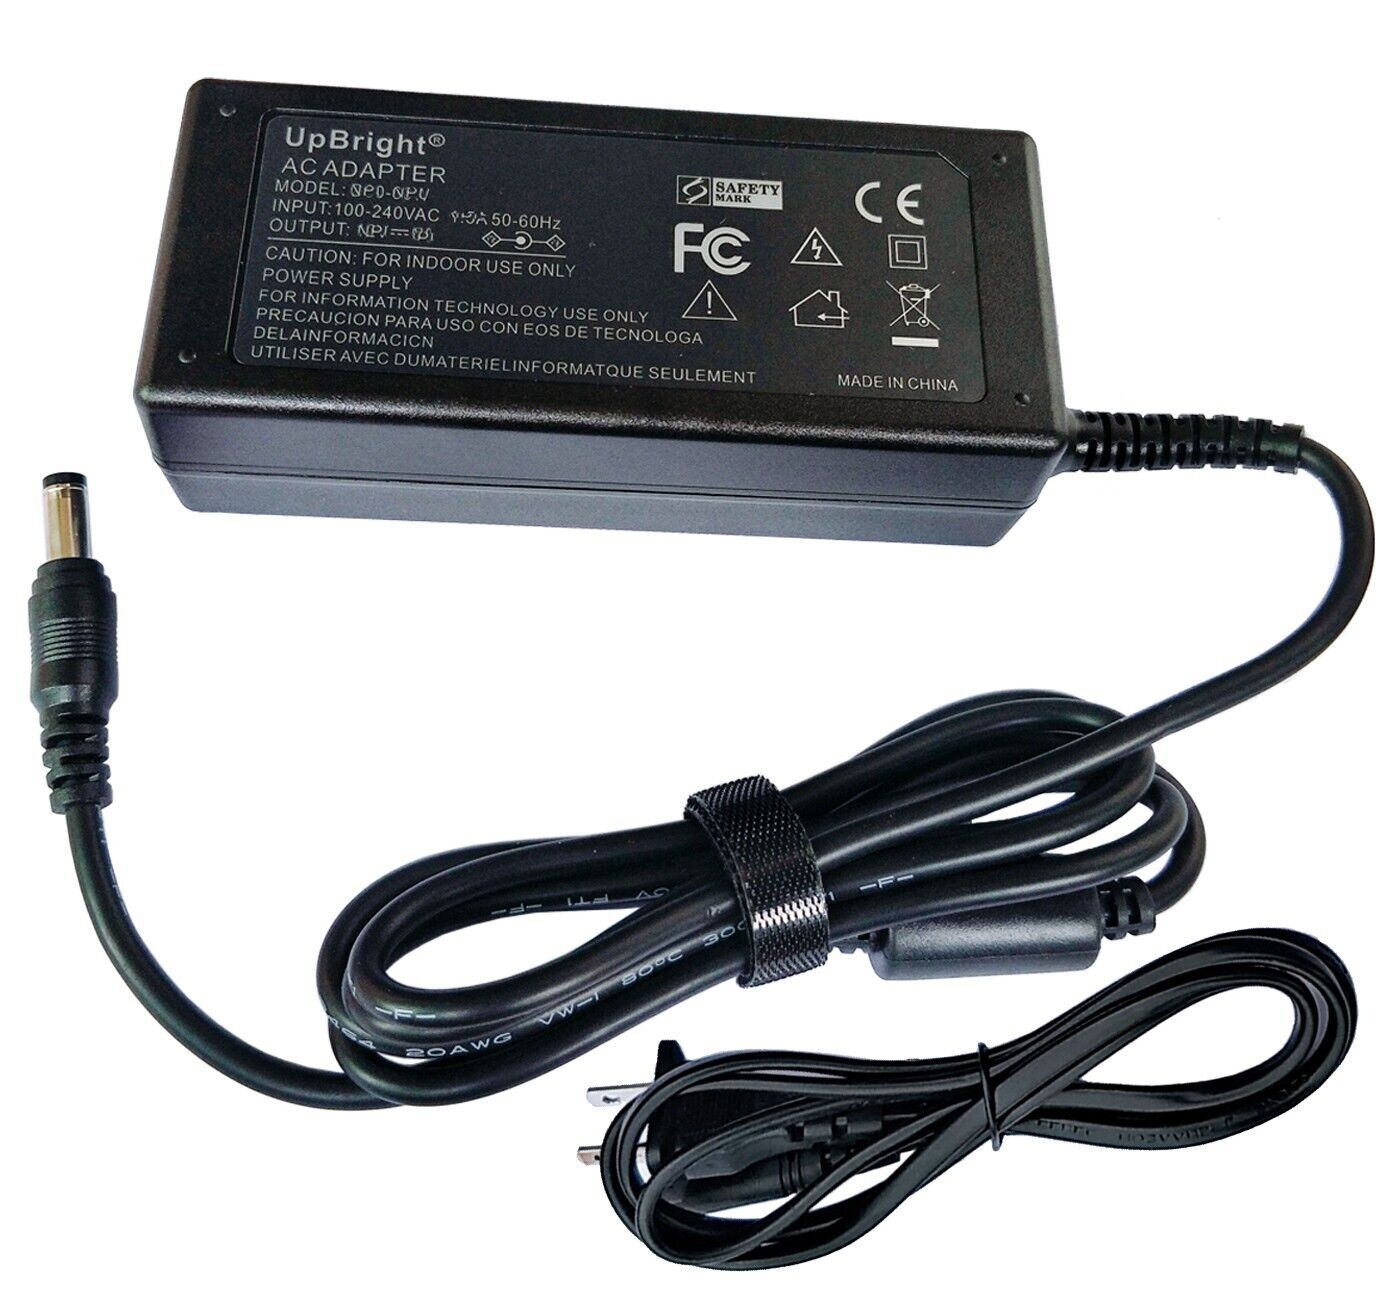 12V AC Adapter For Zyxel NAS326 Cloud Storage 2-Bay Home Remote Media Streaming